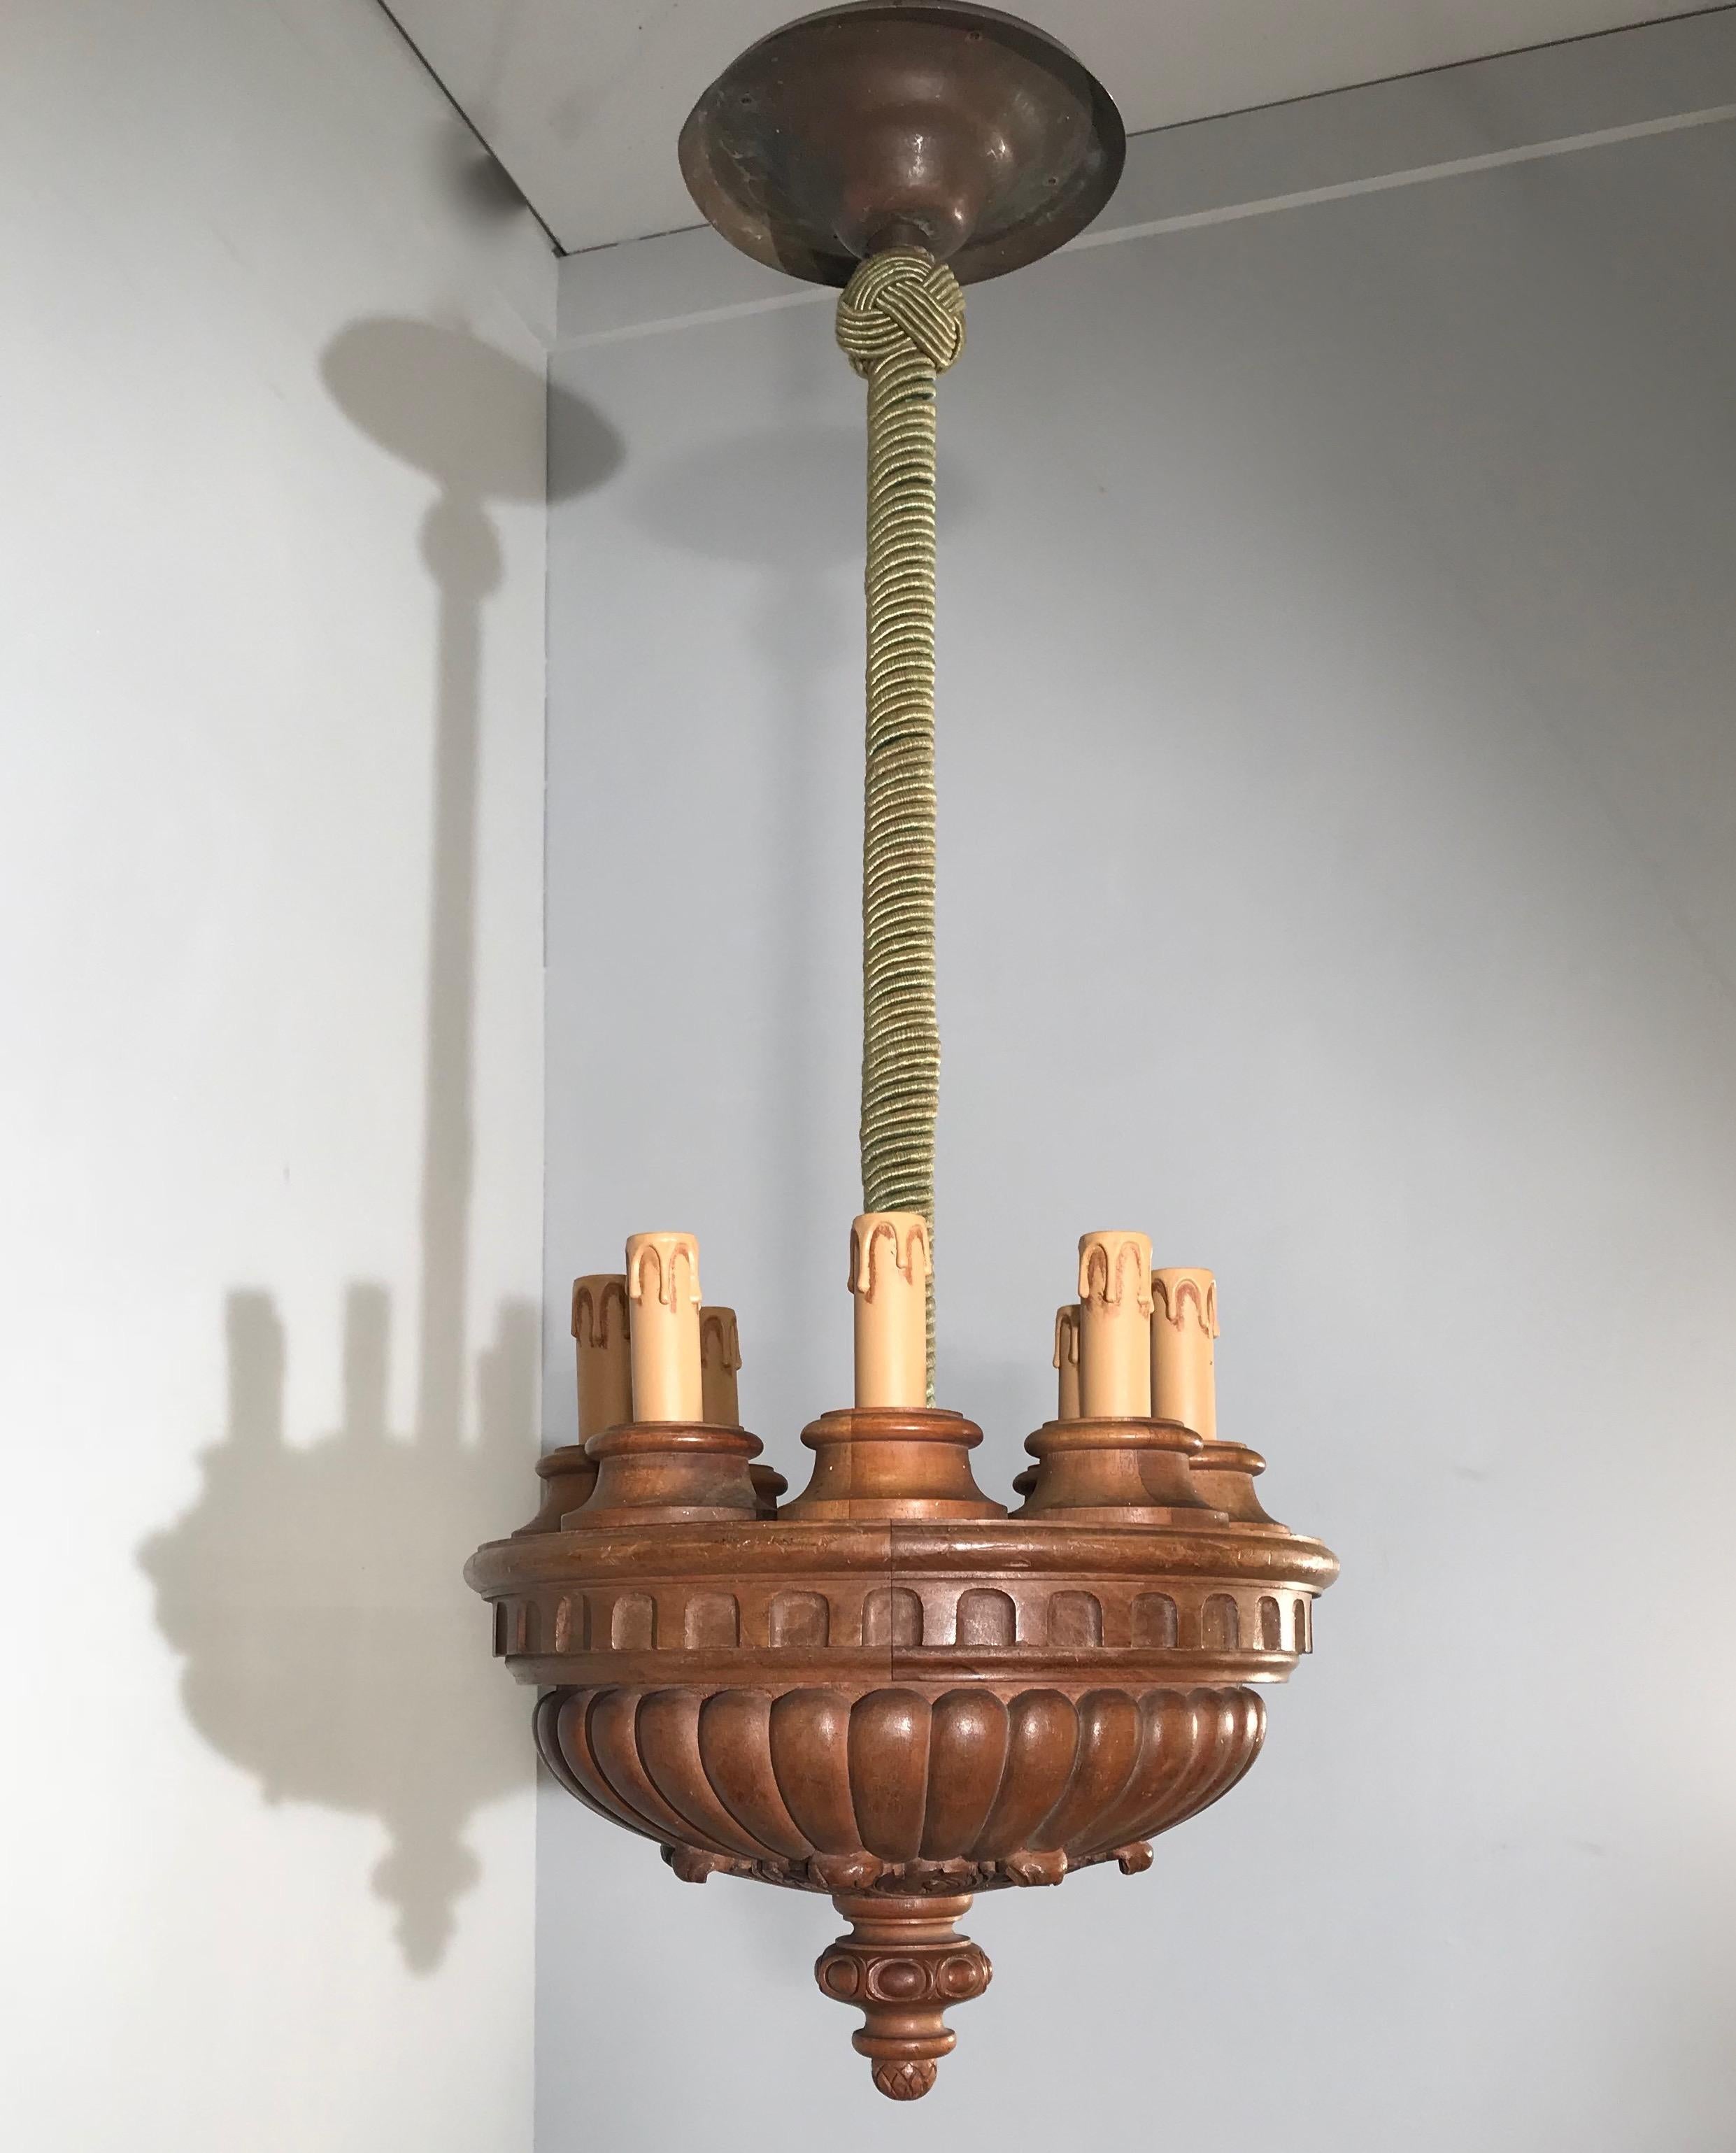 Rare and Decorative Early 1900s Eight-Light Quality Carved Nutwood Pendant Light For Sale 2